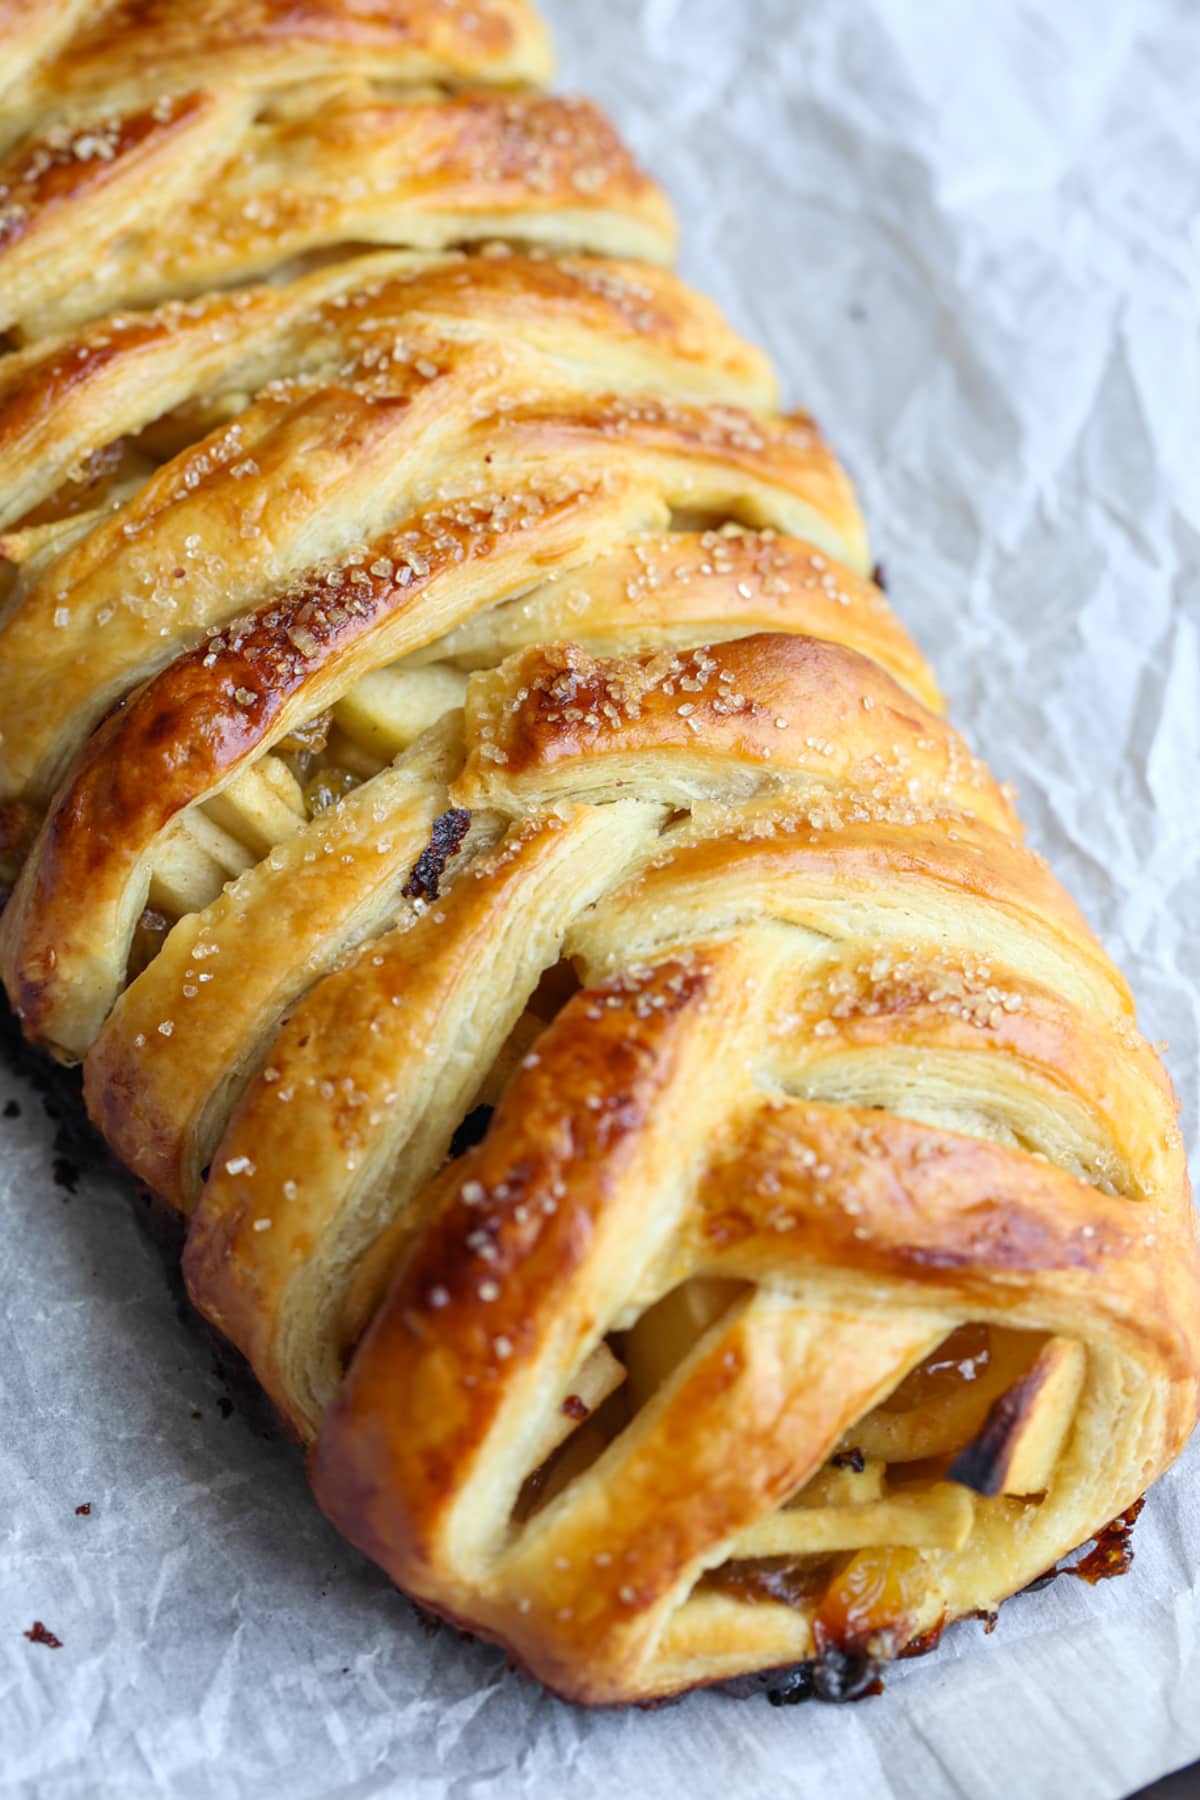 A baked apple strudel with a braided pastry on a baking sheet